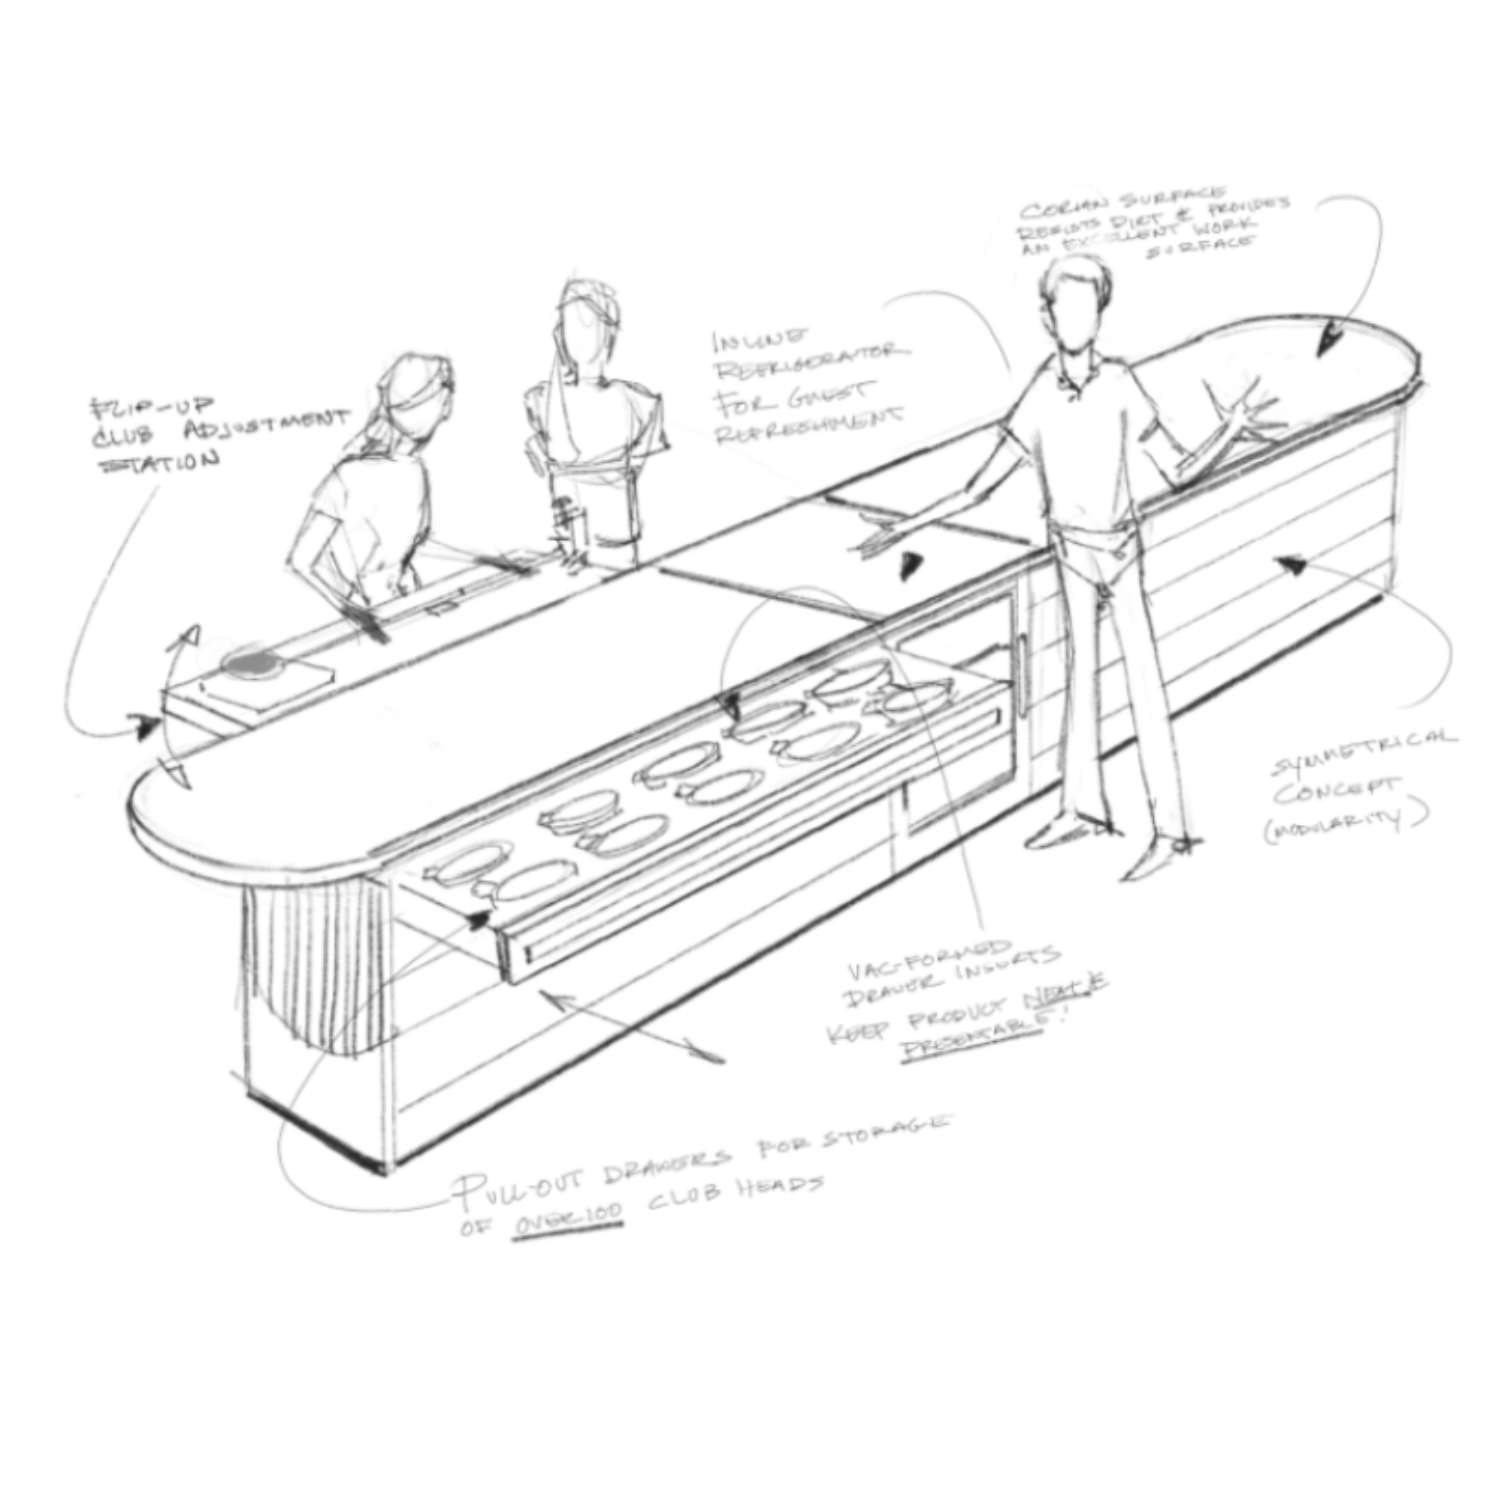 A sketch of the counter top